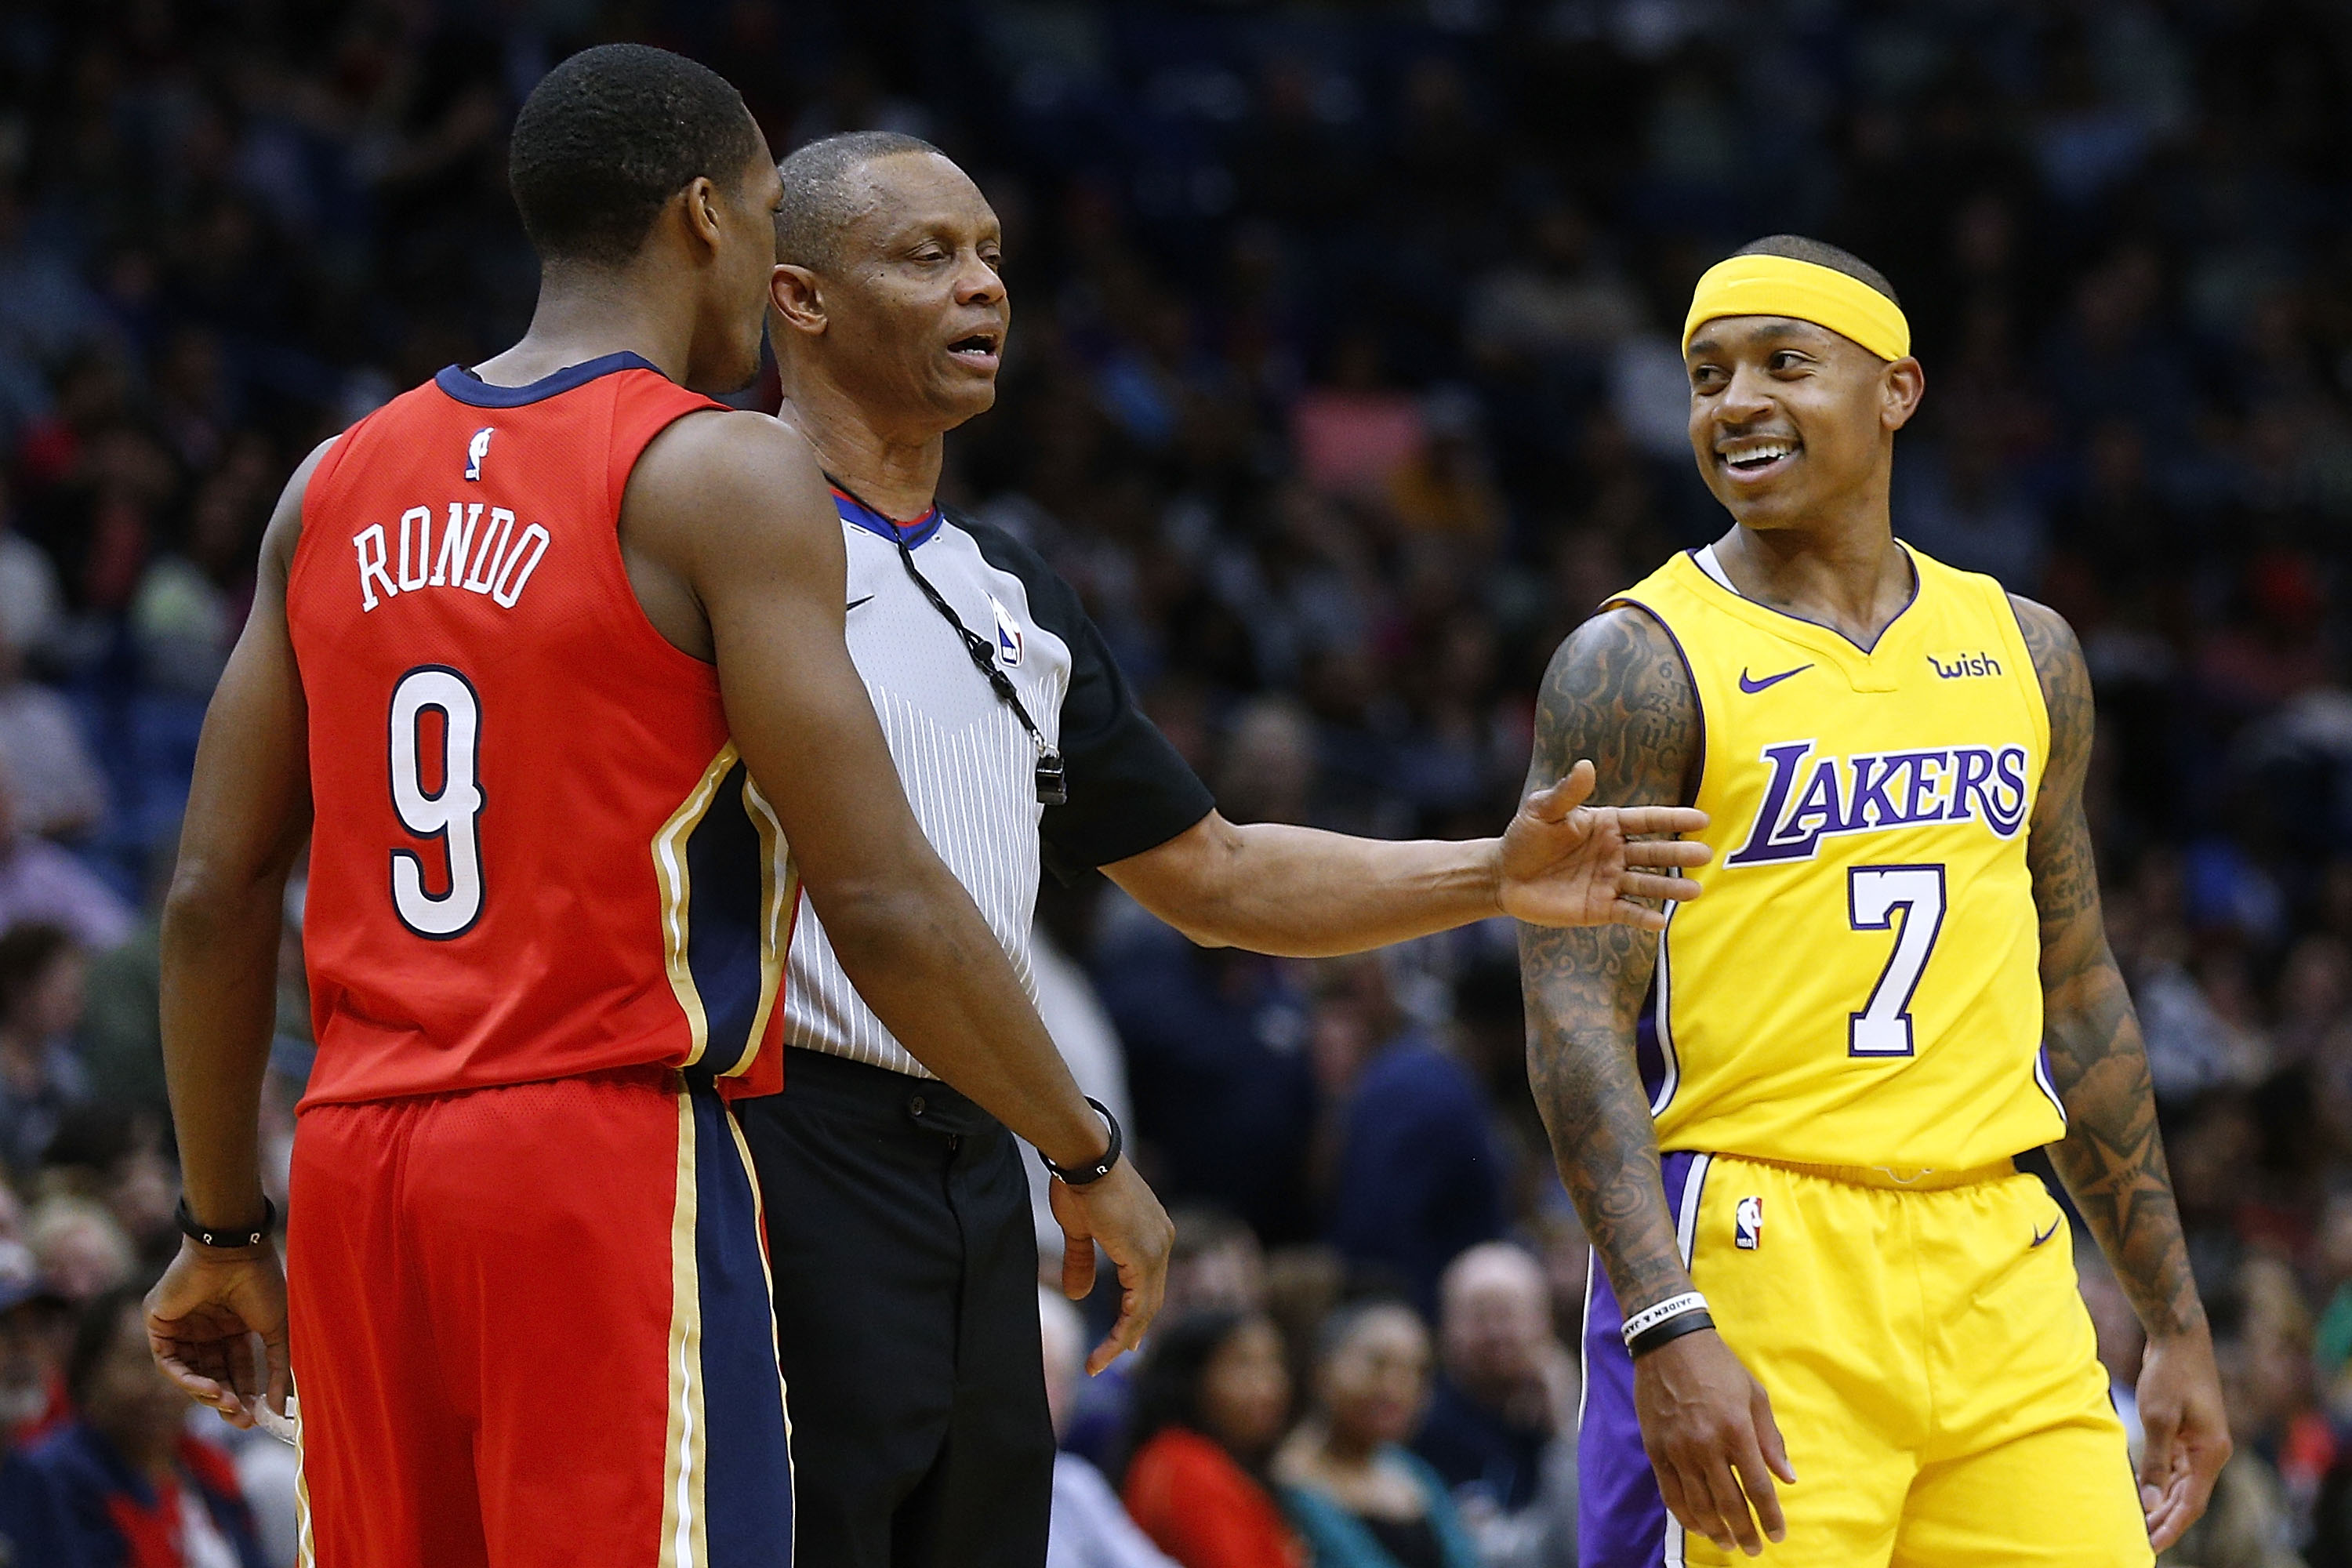 Isaiah Thomas and Rajon Rondo scuffle during a Lakers-Pelicans game in 2018